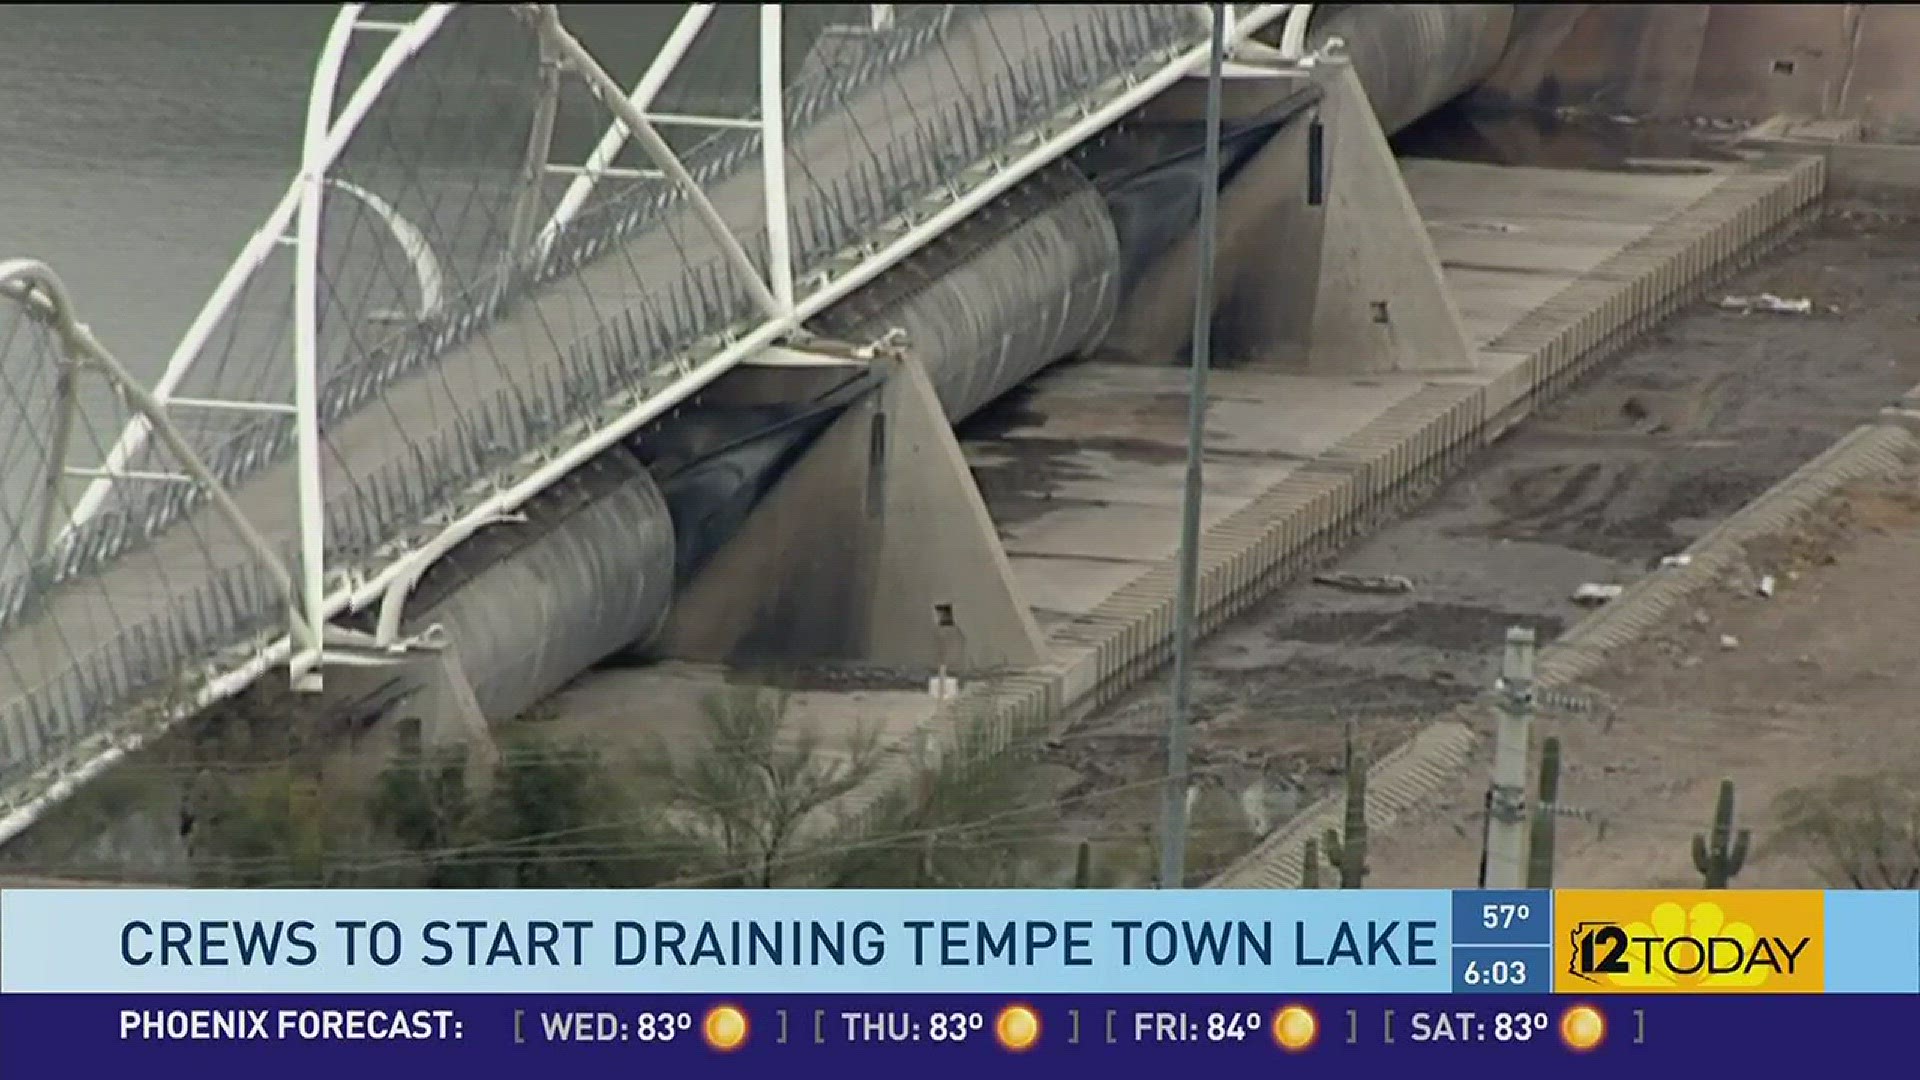 Tempe Town Lake is now closed for boating, rowing and fishing while crews empty it of water.